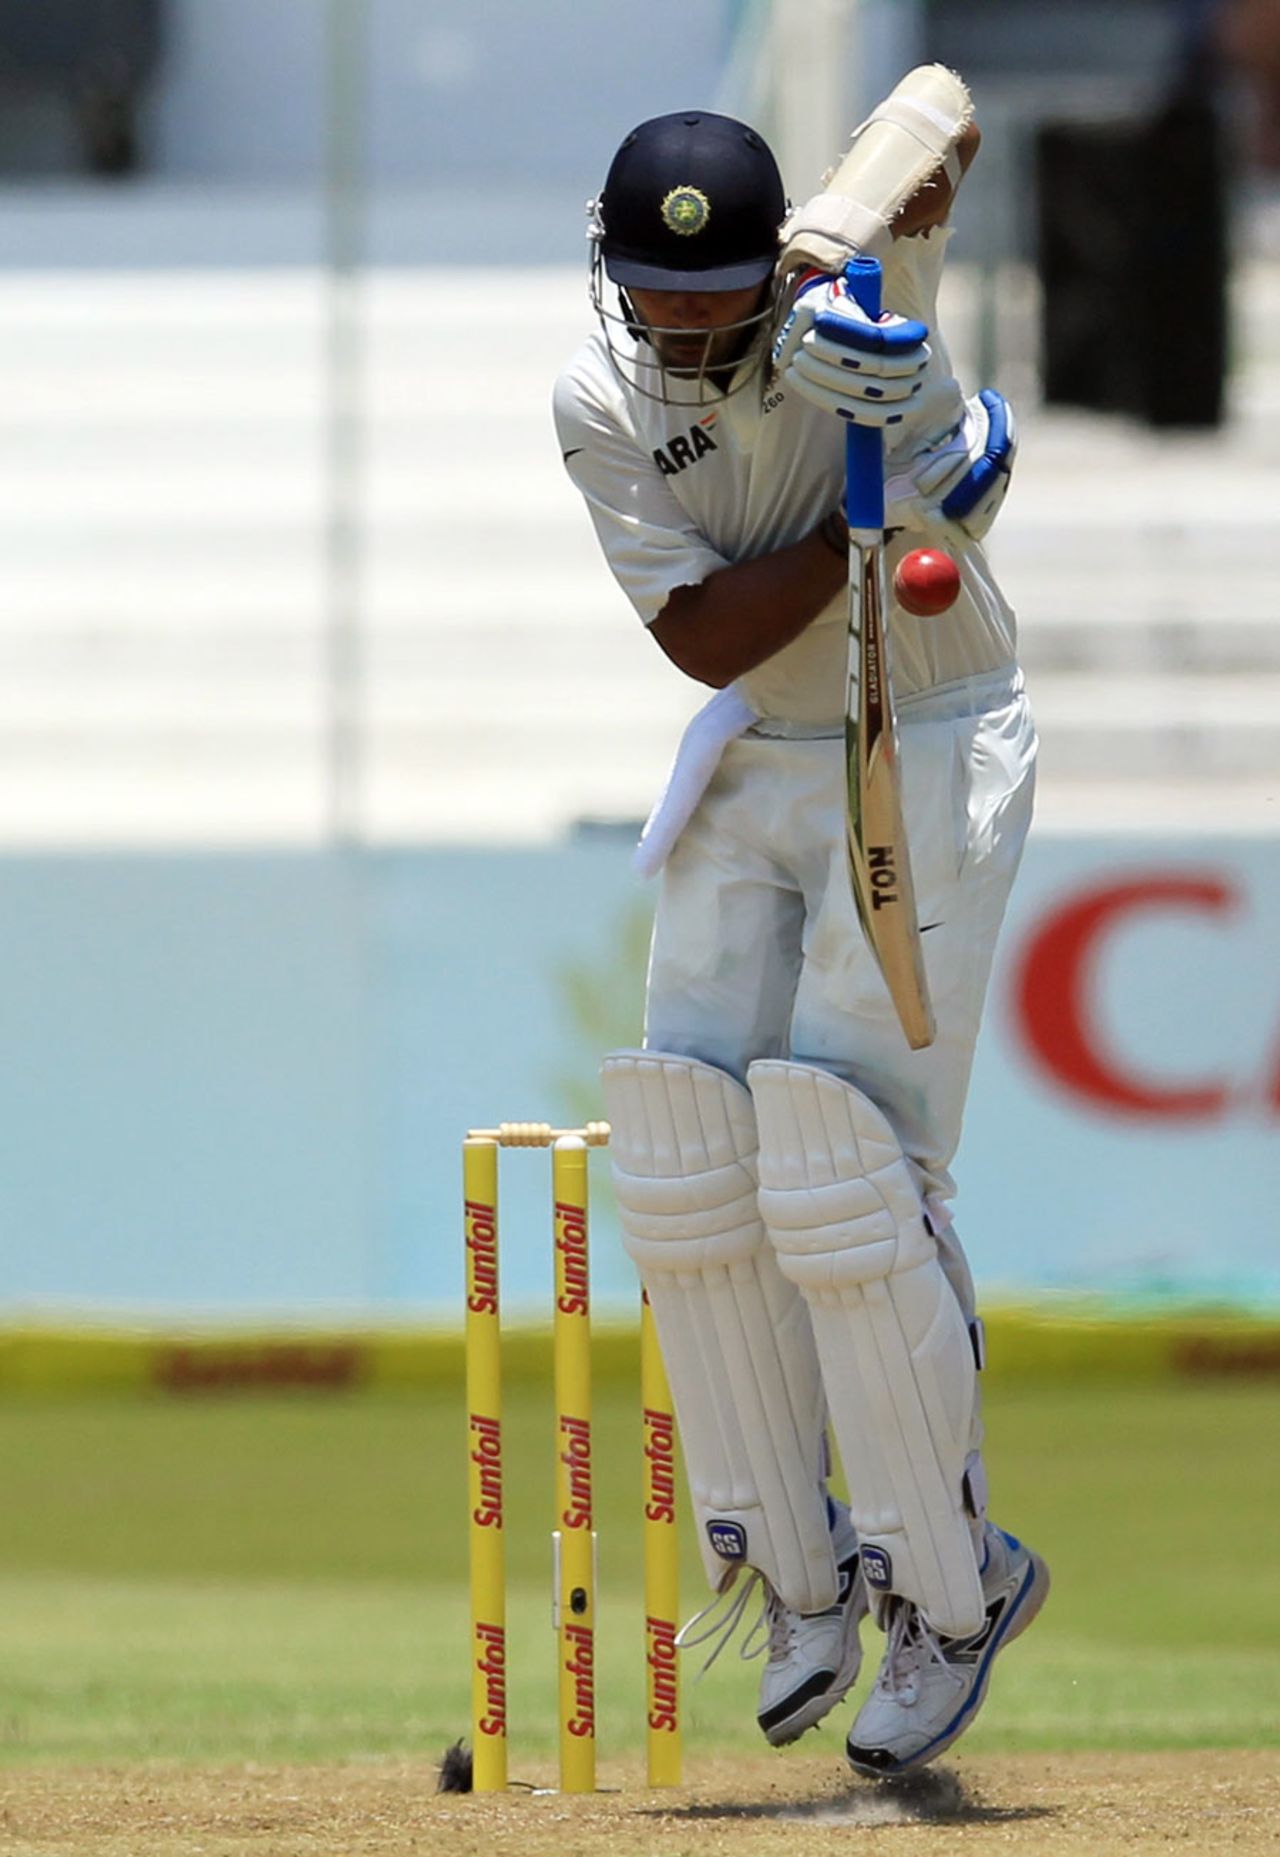 Murali Vijay rides the bounce to defend a short ball, South Africa v India, 2nd Test, Durban, 1st day, December 26, 2013